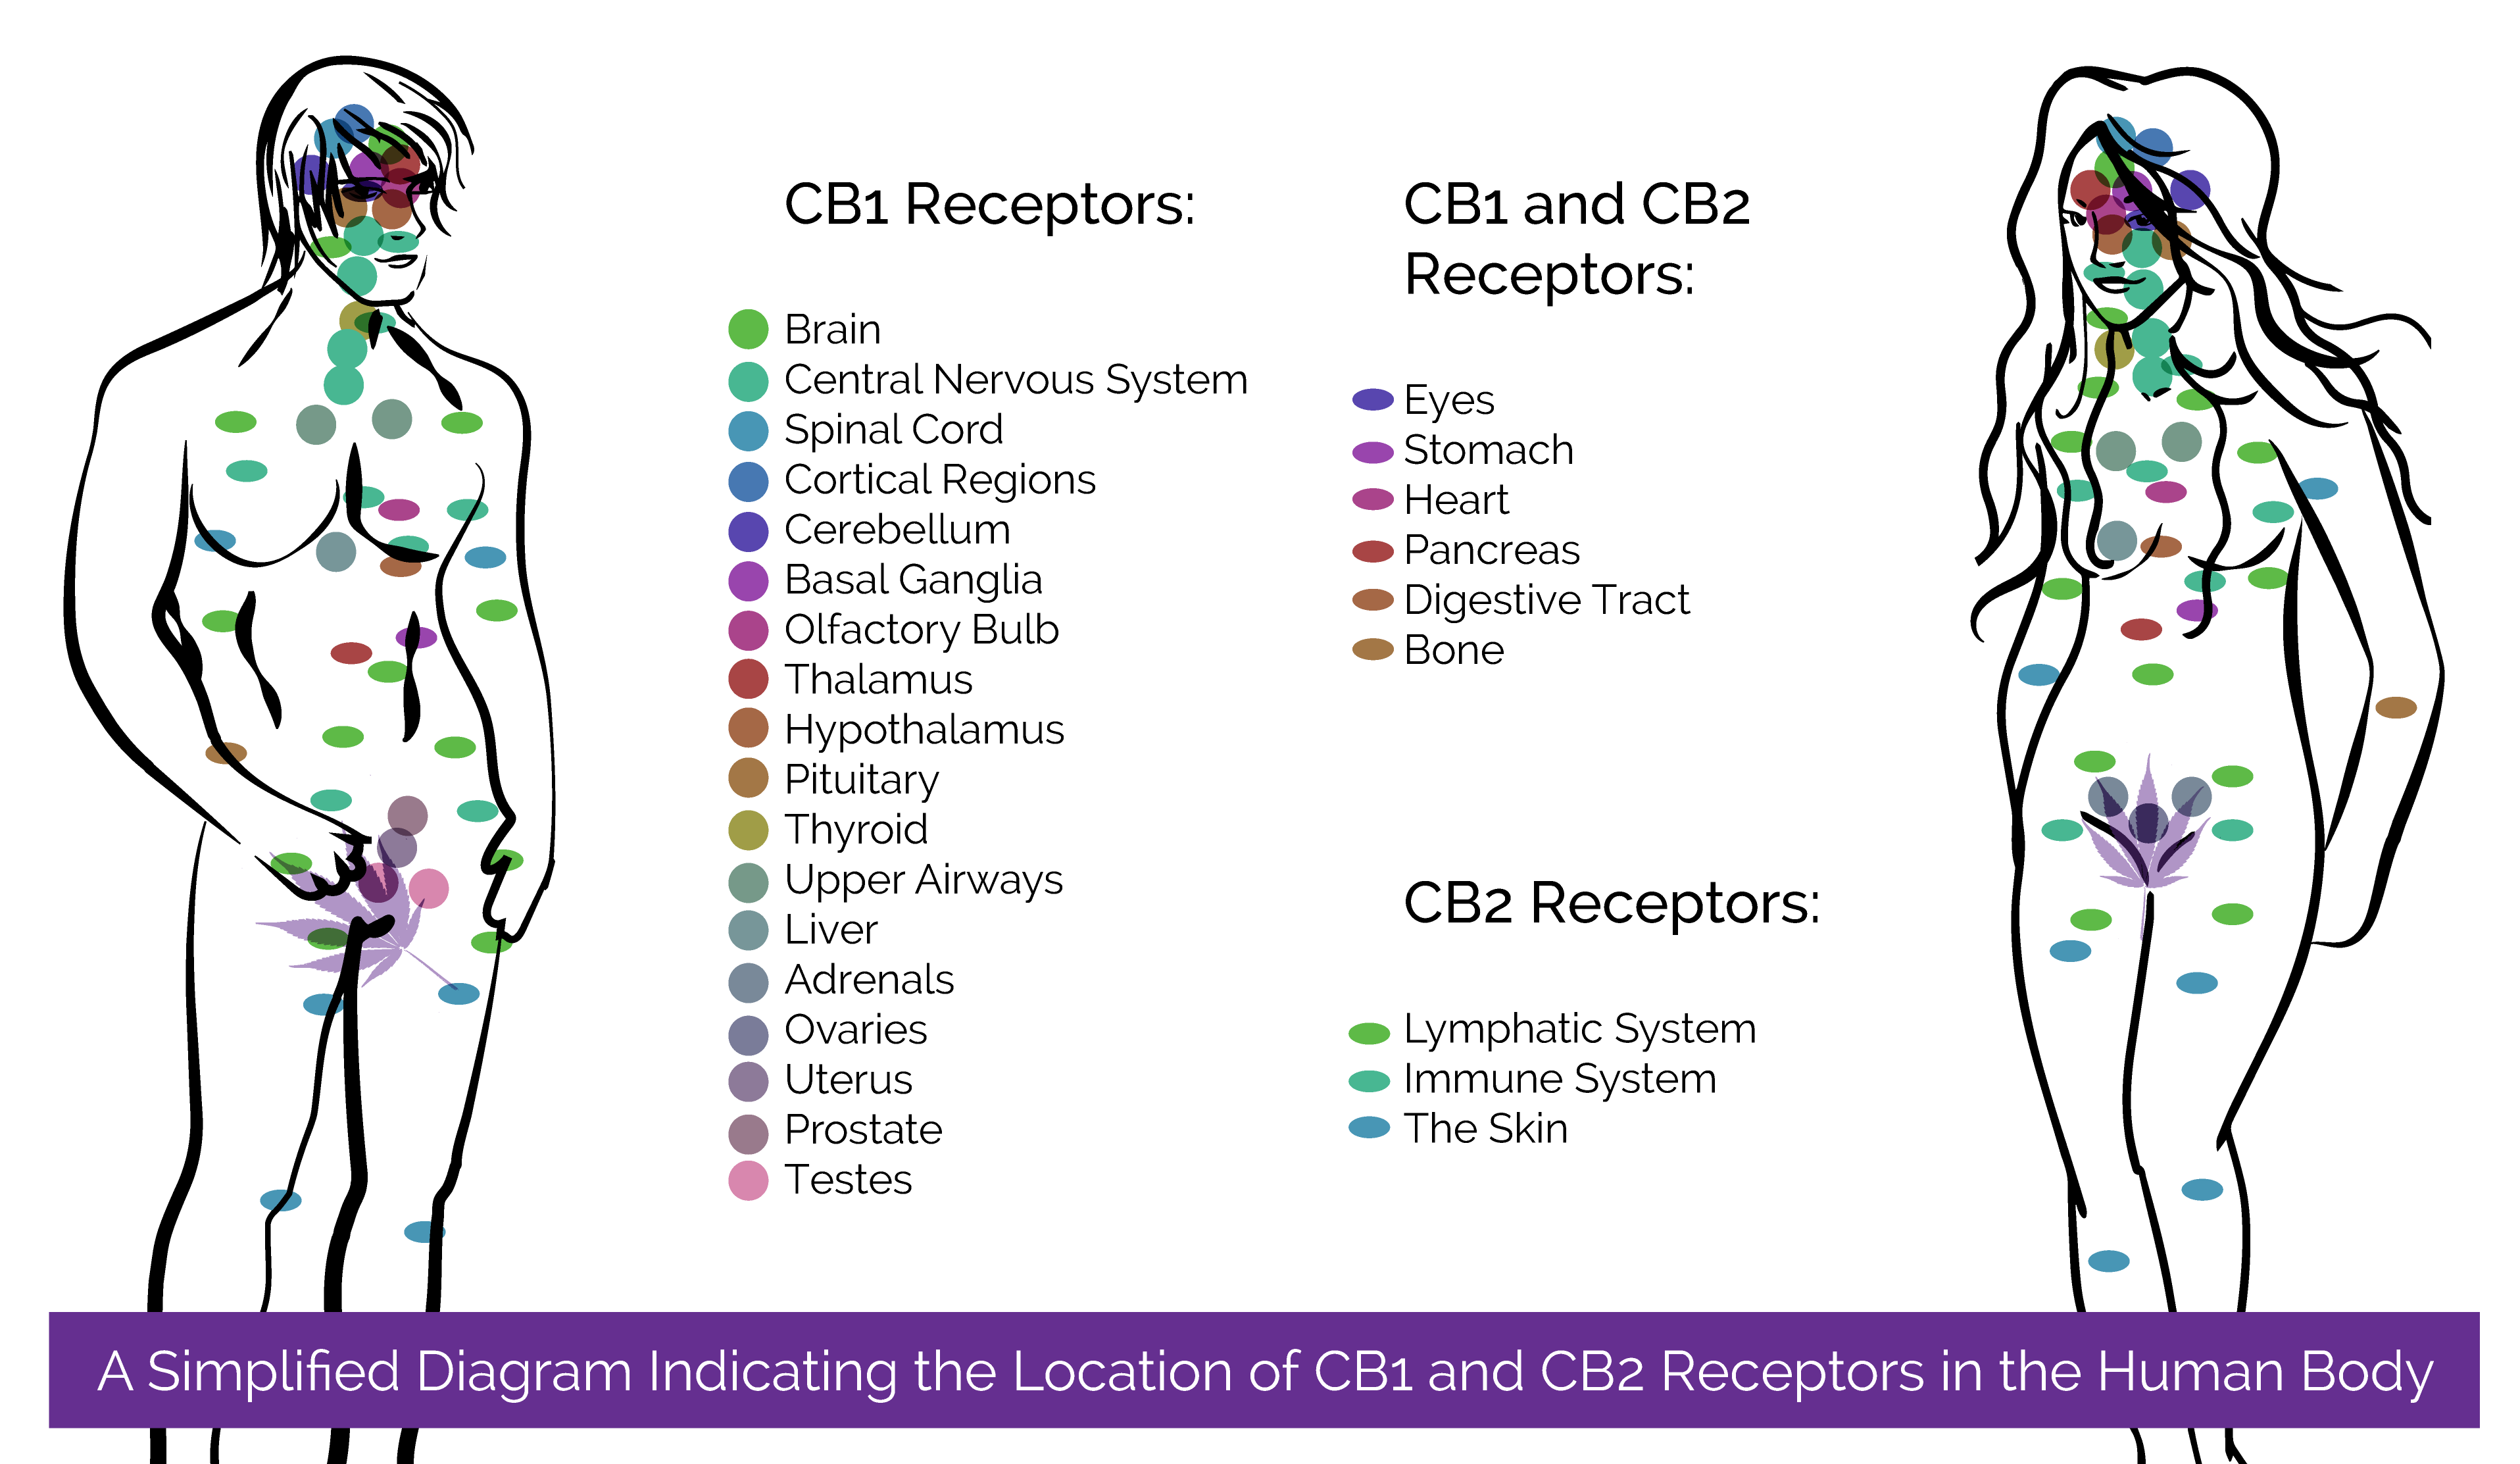 Male and Female Humans covered in location identifies for placement of CB1 and CB2 receptors